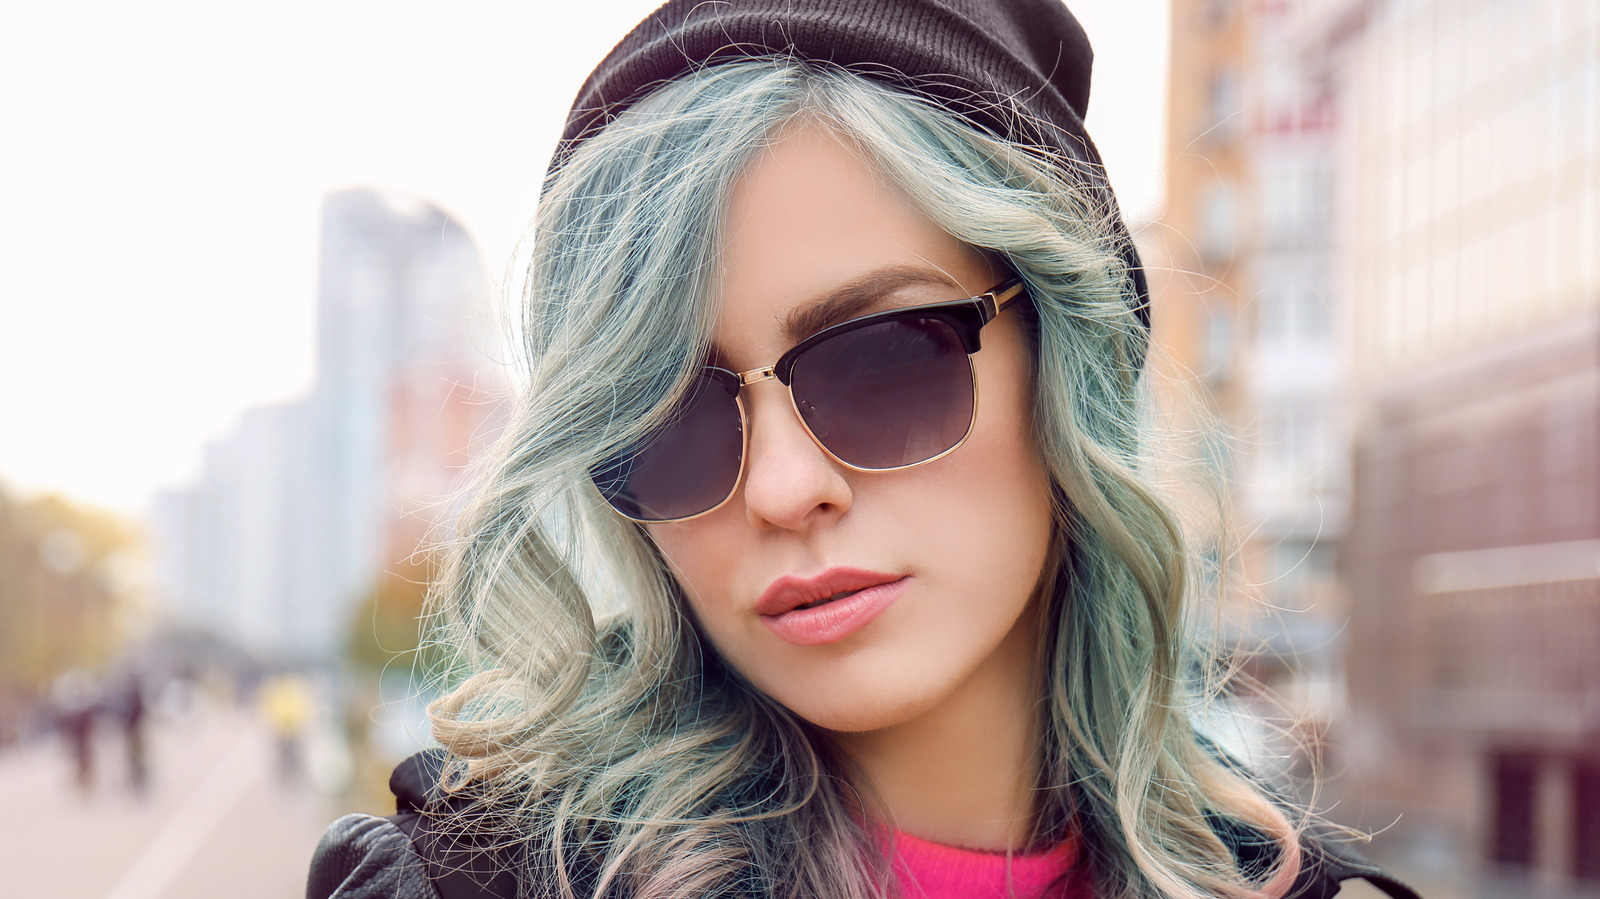 5. "Pastel Sky Blue Hair: The Dos and Don'ts of Dyeing Your Hair This Color" - wide 2